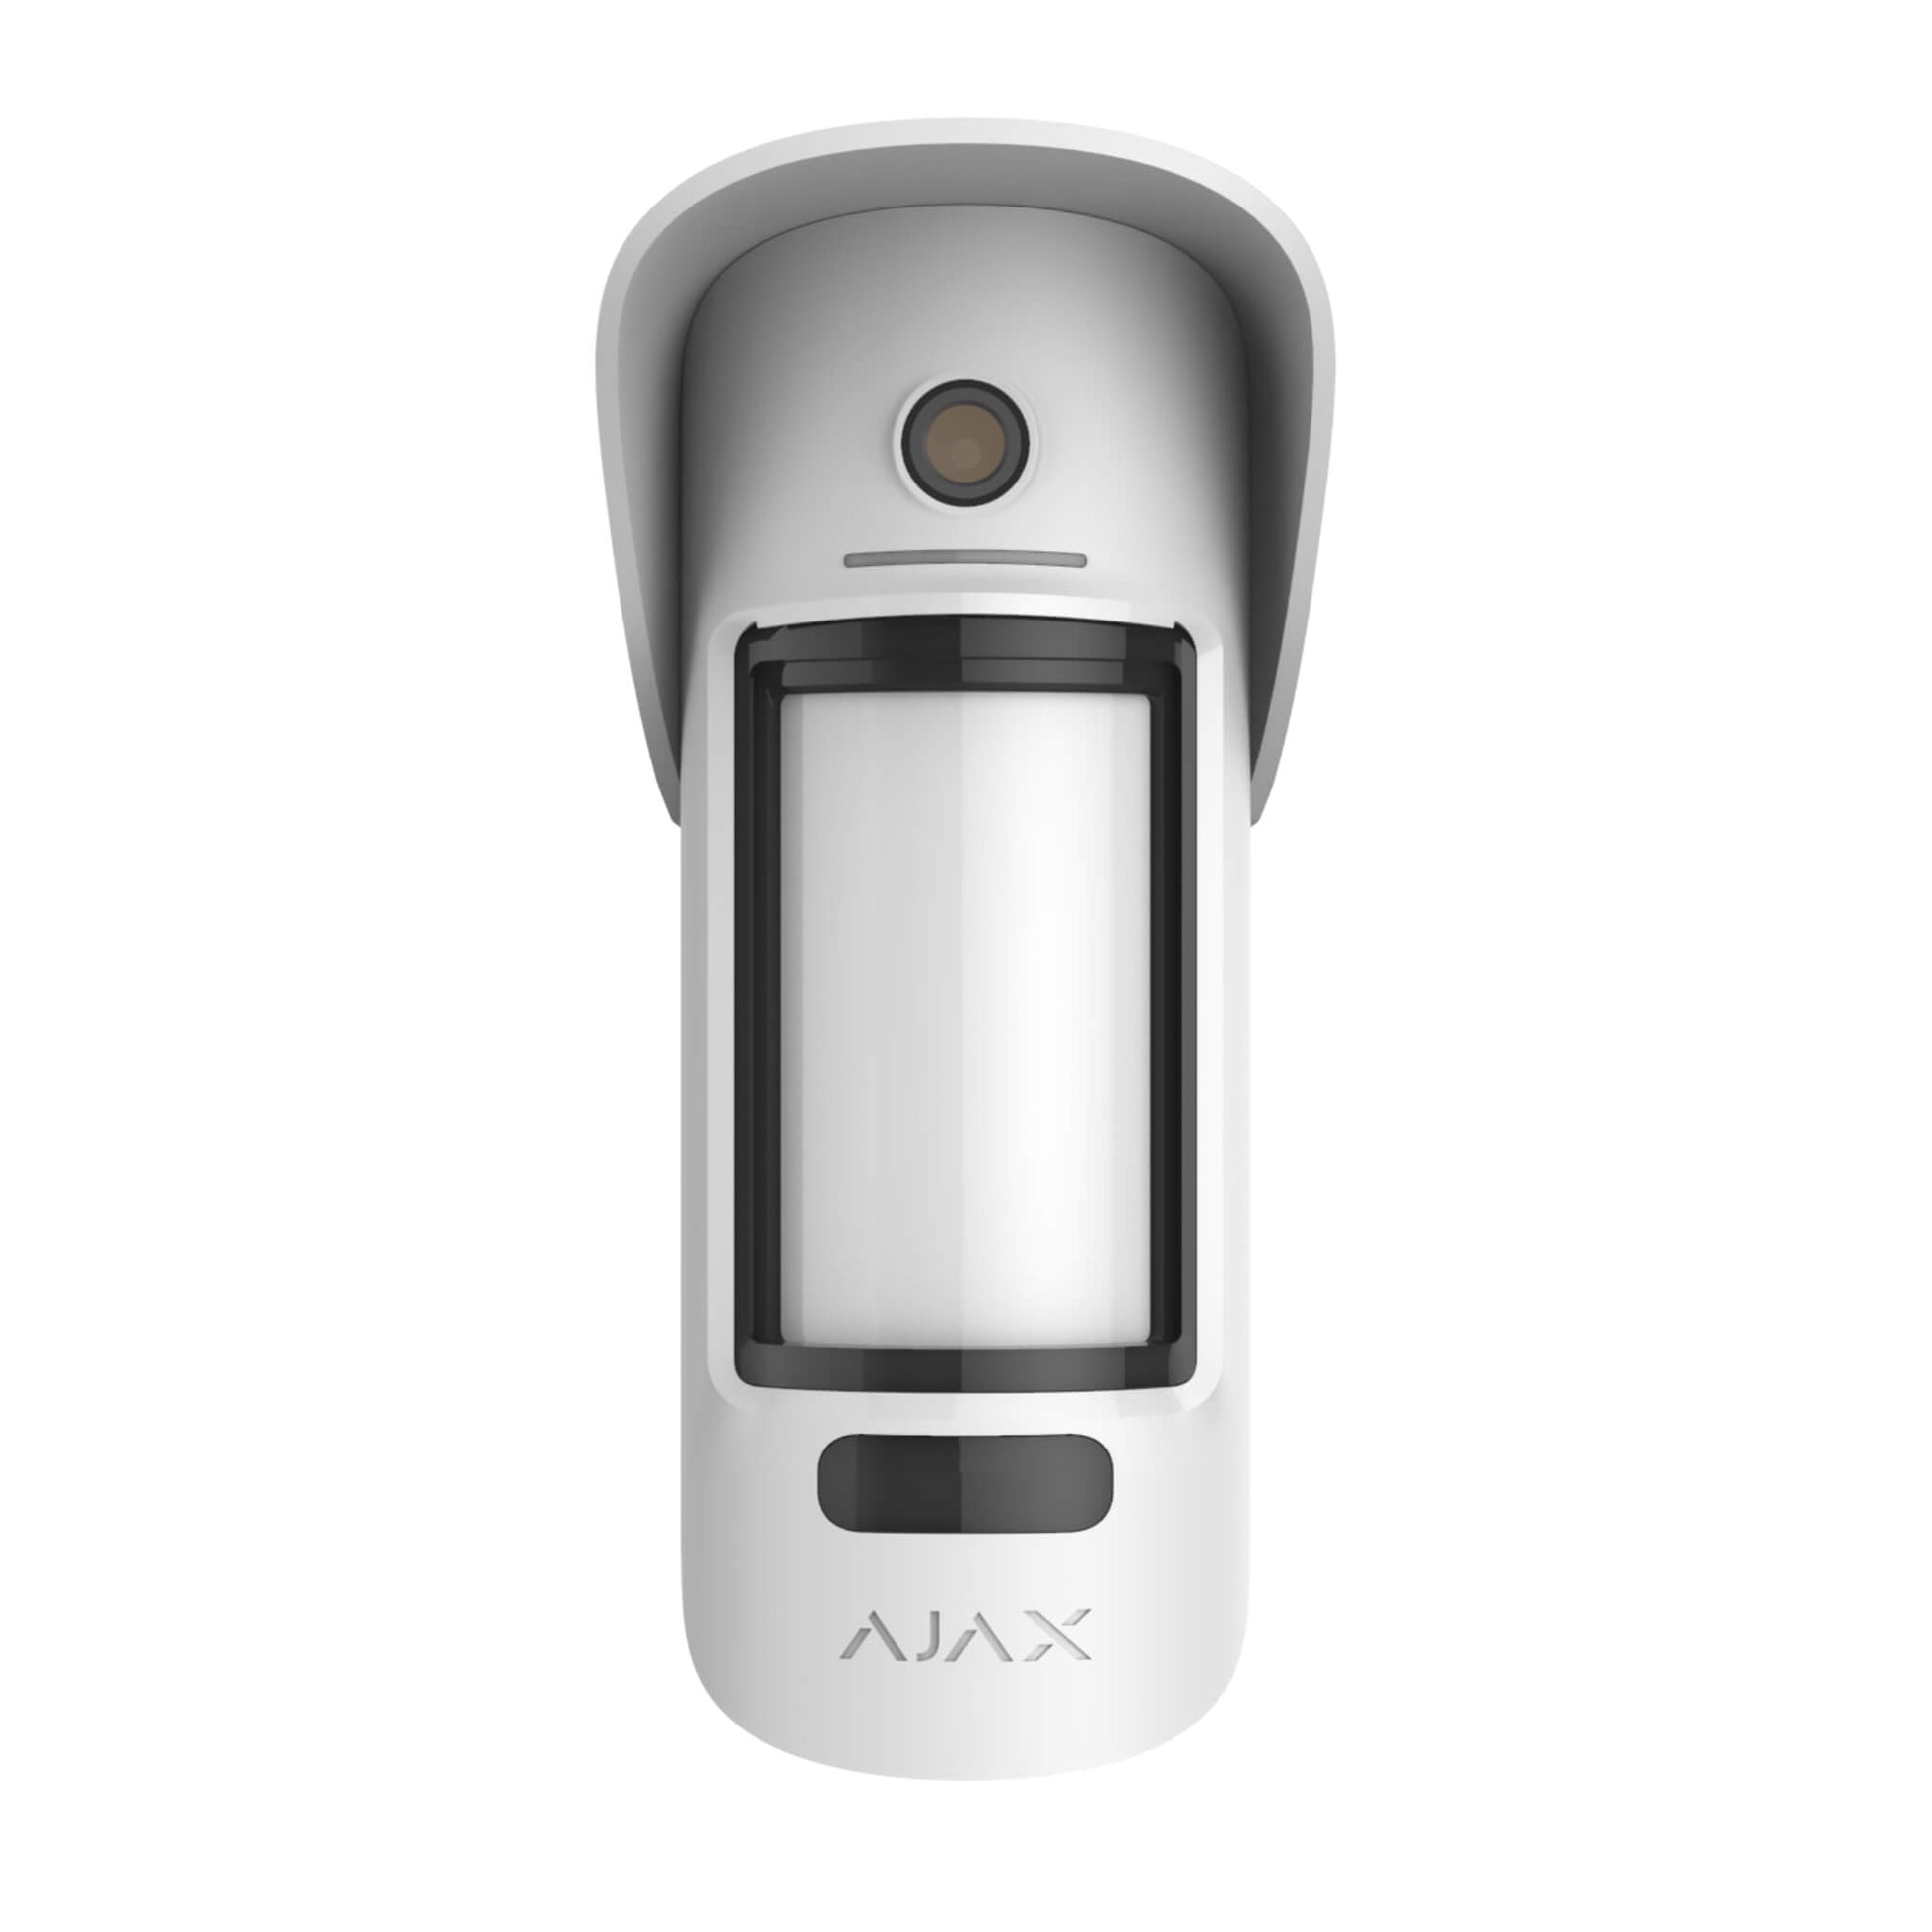 White Ajax MotionCam Outdoor - a wireless motion detector with camera for photo real verification of alarms , for home and business security. the device ships in a size of 206 × 108 × 93 mm. and weighs 470 grams. Device is rated IP65 and is for outdoor use only, Front view of device is displayed. Buy Ajax Online